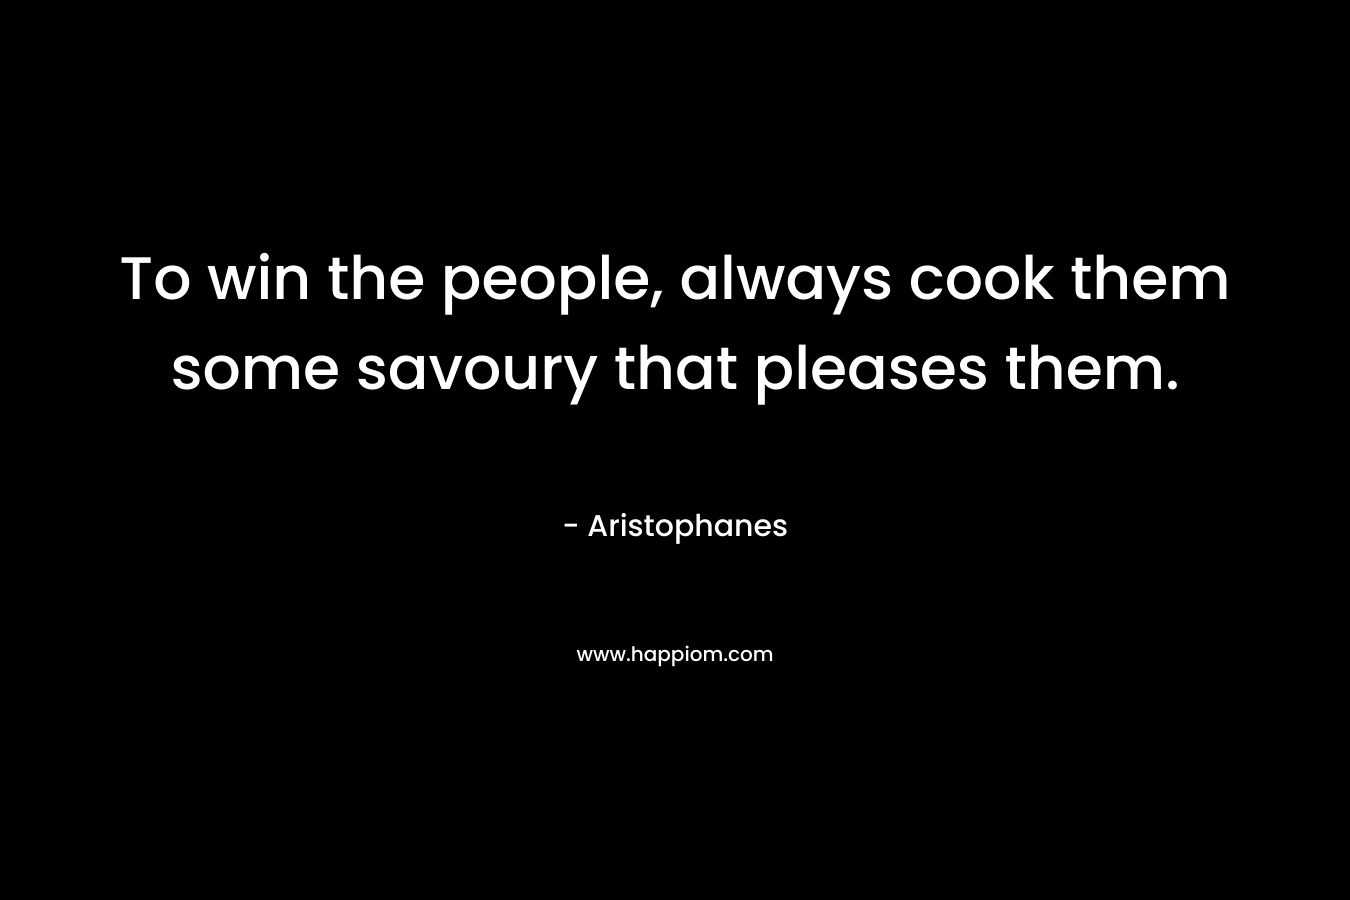 To win the people, always cook them some savoury that pleases them. – Aristophanes